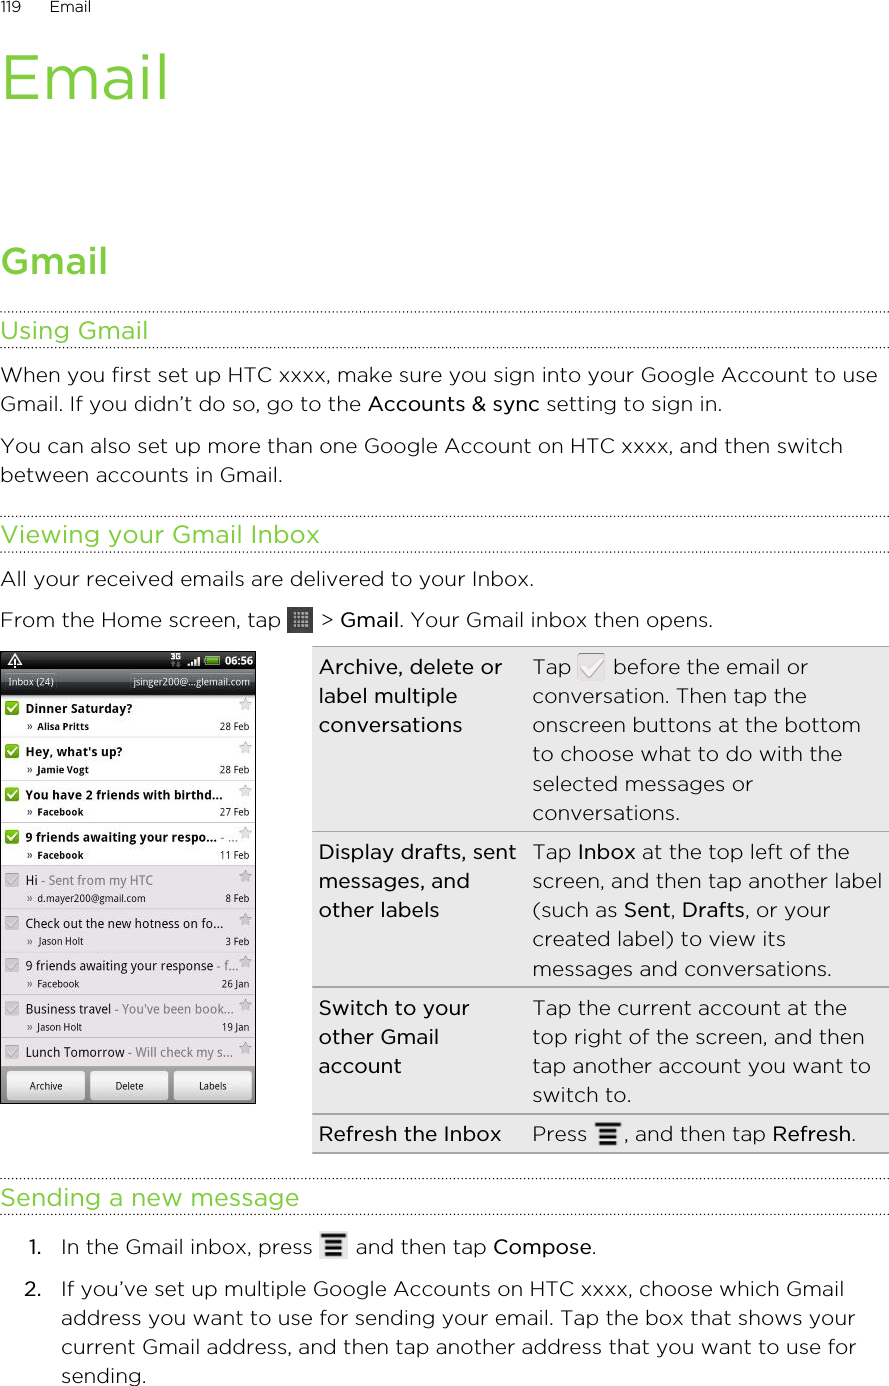 EmailGmailUsing GmailWhen you first set up HTC xxxx, make sure you sign into your Google Account to useGmail. If you didn’t do so, go to the Accounts &amp; sync setting to sign in.You can also set up more than one Google Account on HTC xxxx, and then switchbetween accounts in Gmail.Viewing your Gmail InboxAll your received emails are delivered to your Inbox.From the Home screen, tap   &gt; Gmail. Your Gmail inbox then opens.Archive, delete orlabel multipleconversationsTap   before the email orconversation. Then tap theonscreen buttons at the bottomto choose what to do with theselected messages orconversations.Display drafts, sentmessages, andother labelsTap Inbox at the top left of thescreen, and then tap another label(such as Sent, Drafts, or yourcreated label) to view itsmessages and conversations.Switch to yourother GmailaccountTap the current account at thetop right of the screen, and thentap another account you want toswitch to.Refresh the Inbox Press  , and then tap Refresh.Sending a new message1. In the Gmail inbox, press   and then tap Compose.2. If you’ve set up multiple Google Accounts on HTC xxxx, choose which Gmailaddress you want to use for sending your email. Tap the box that shows yourcurrent Gmail address, and then tap another address that you want to use forsending.119 Email